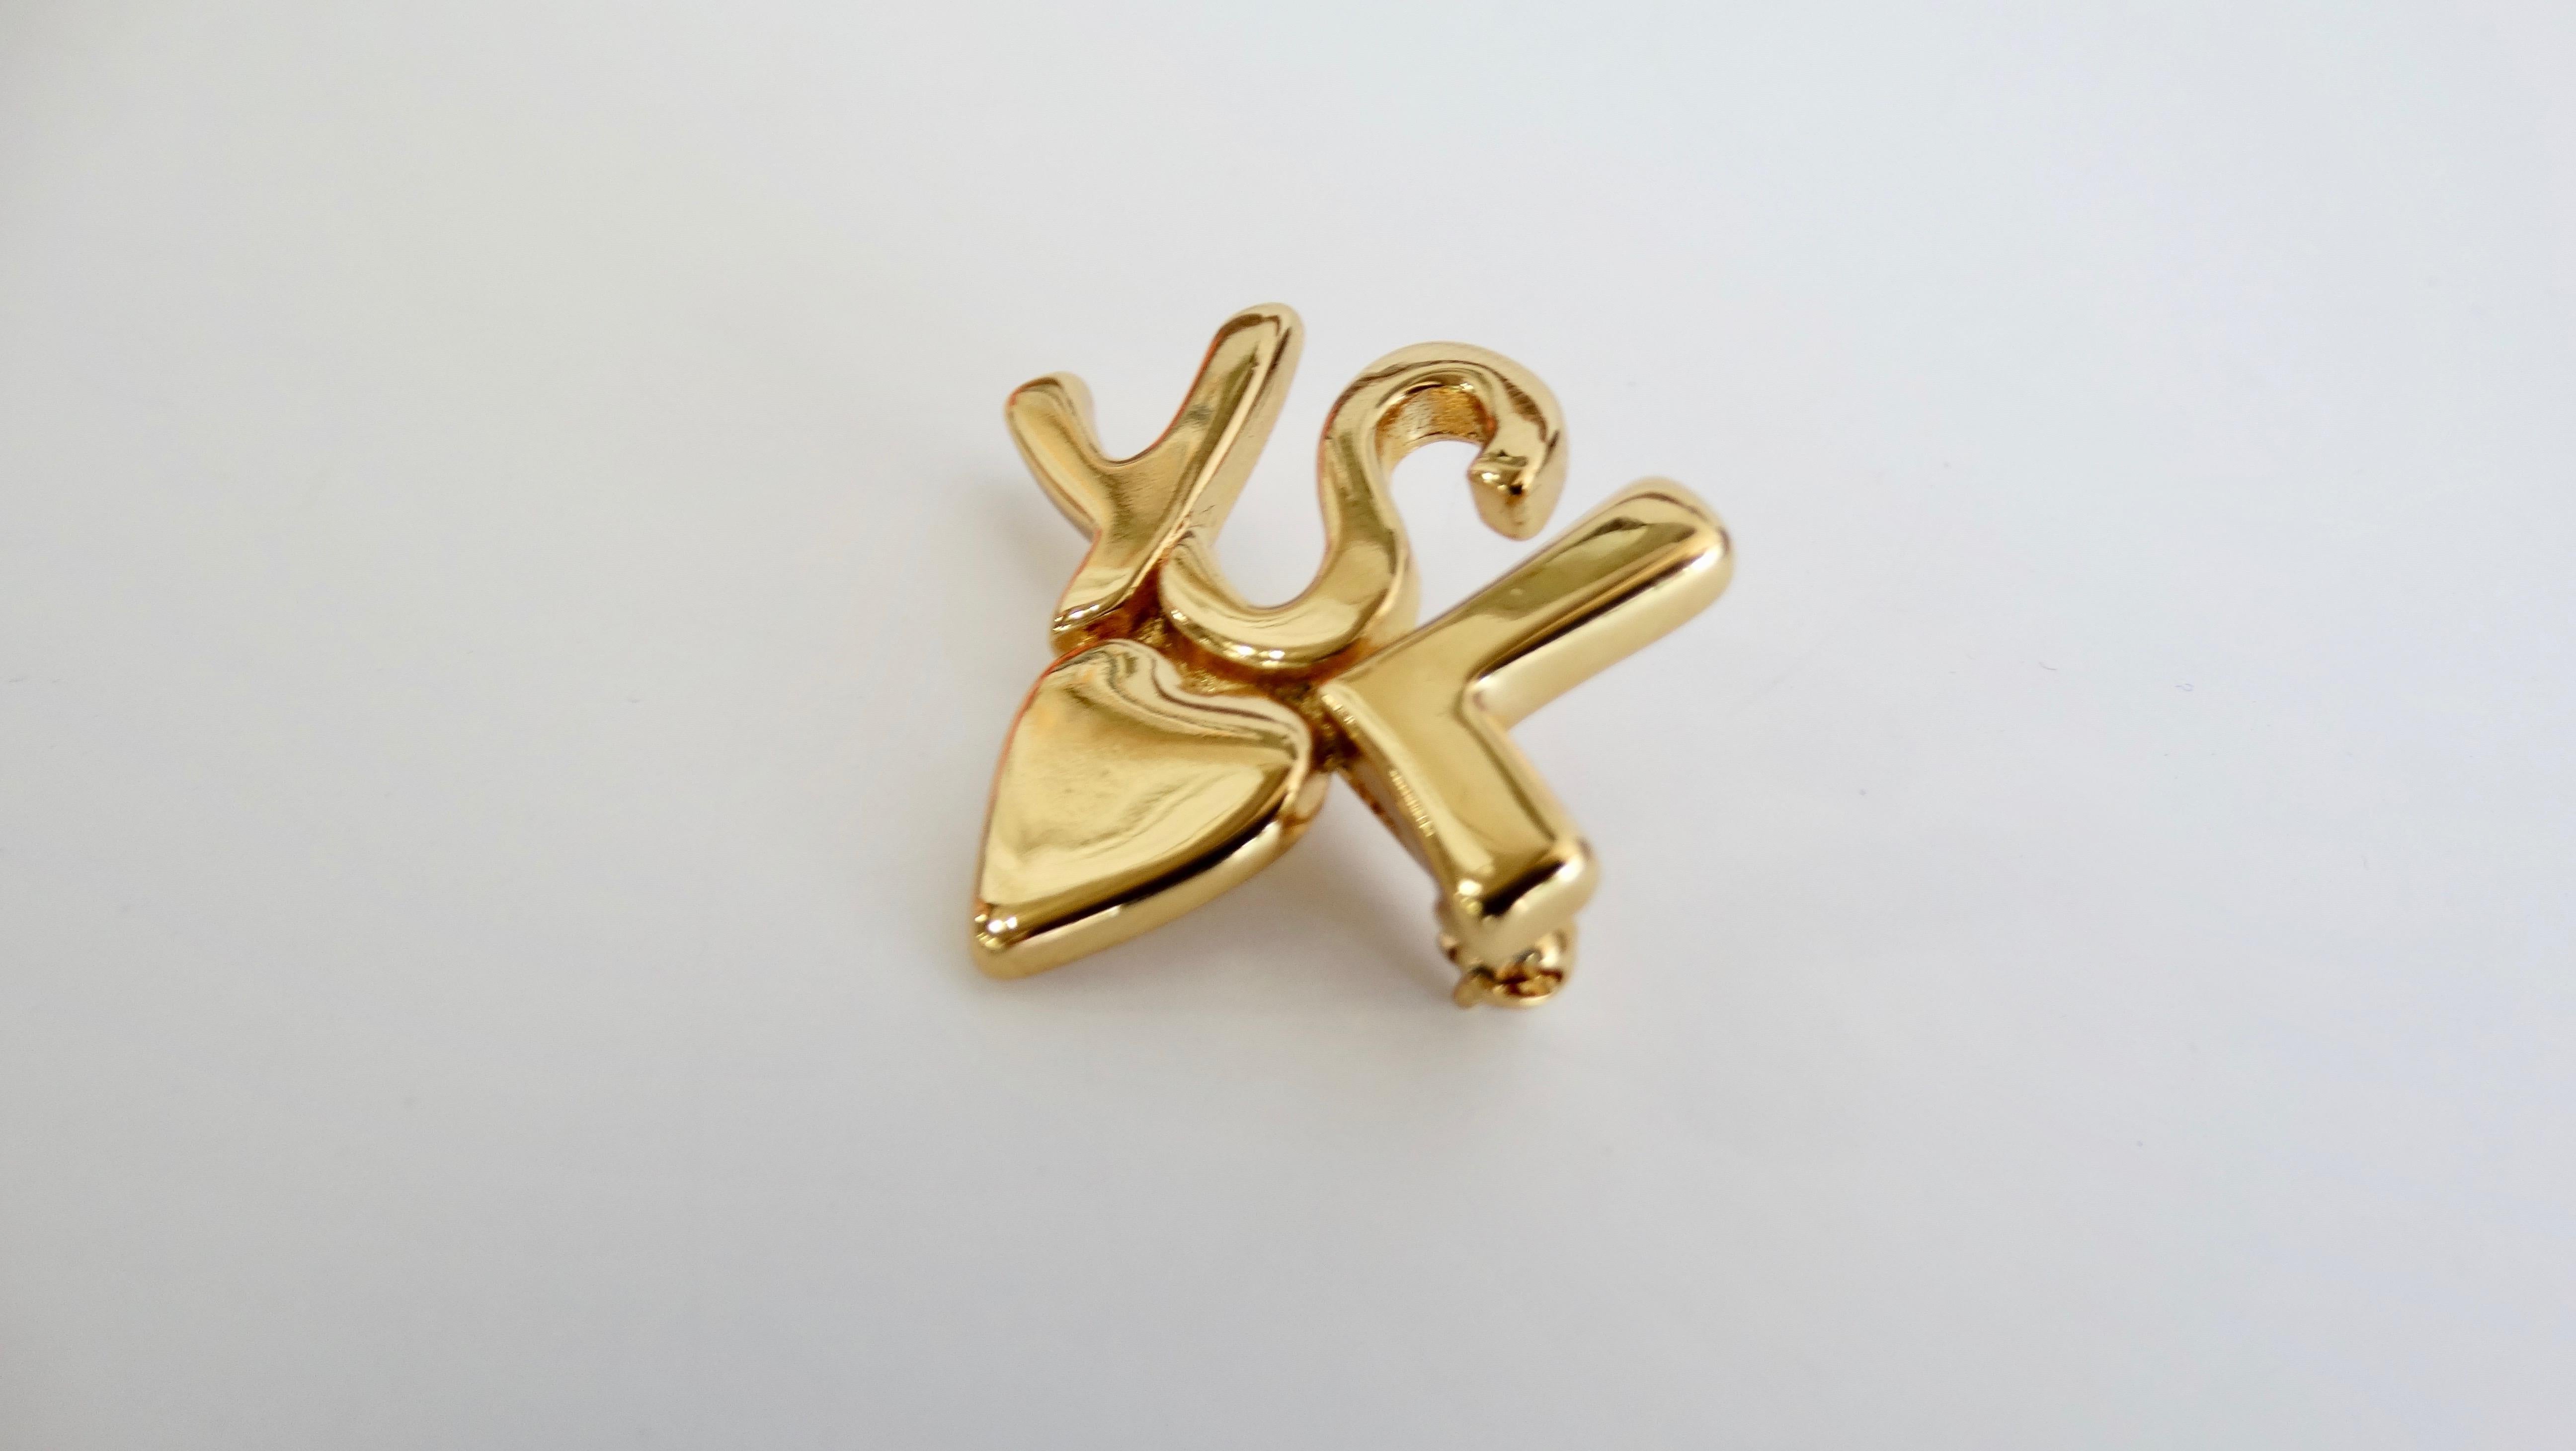 No one does eye candy like Yves Saint Laurent! Circa 1980s, this gold plated pin features the iconic 